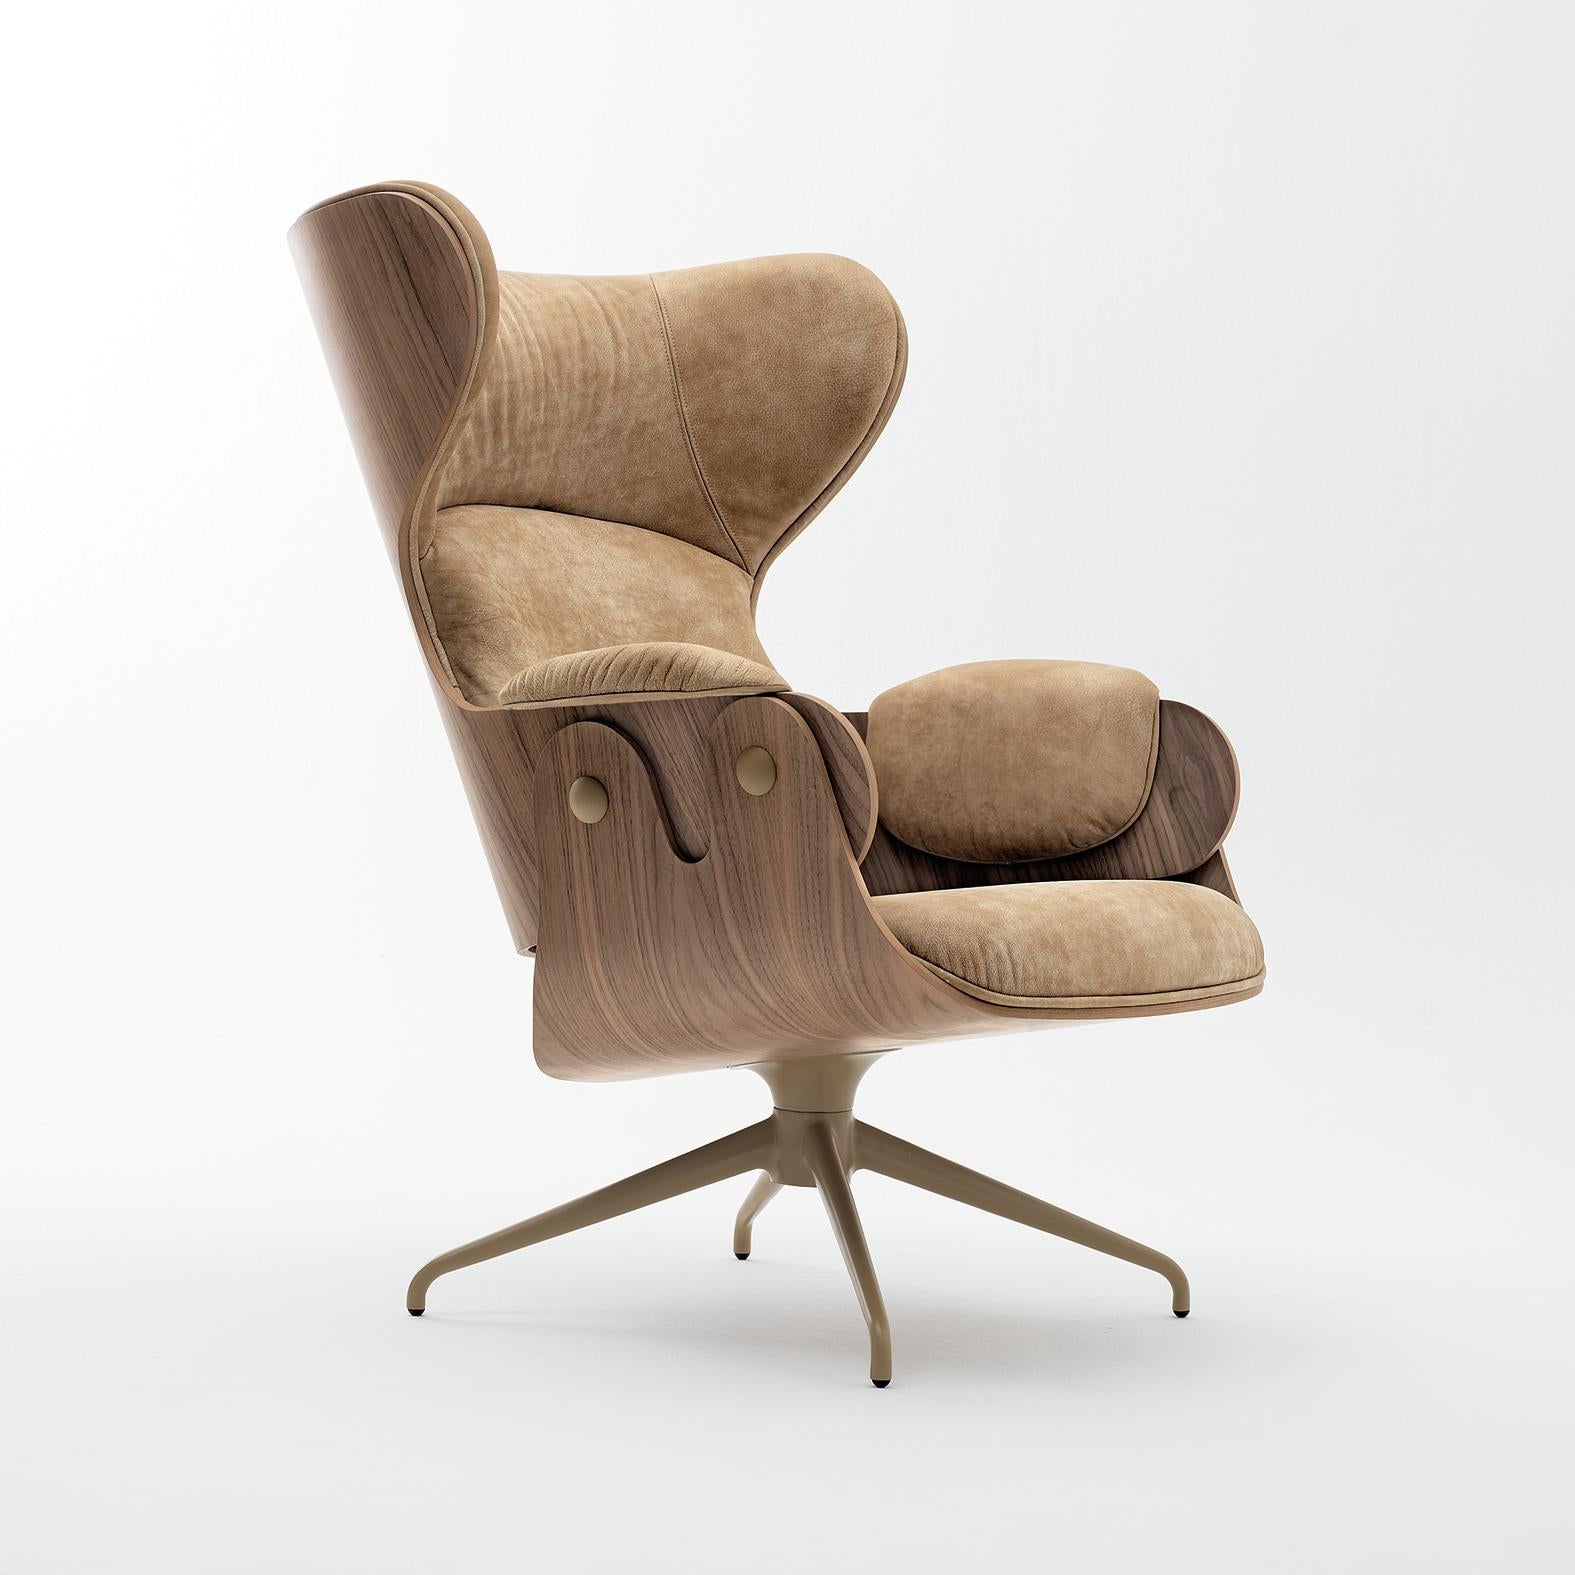 Jaime Hayon, Contemporary, Plywood Walnut Leather Upholstery Lounger Armchair In New Condition For Sale In Barcelona, Barcelona